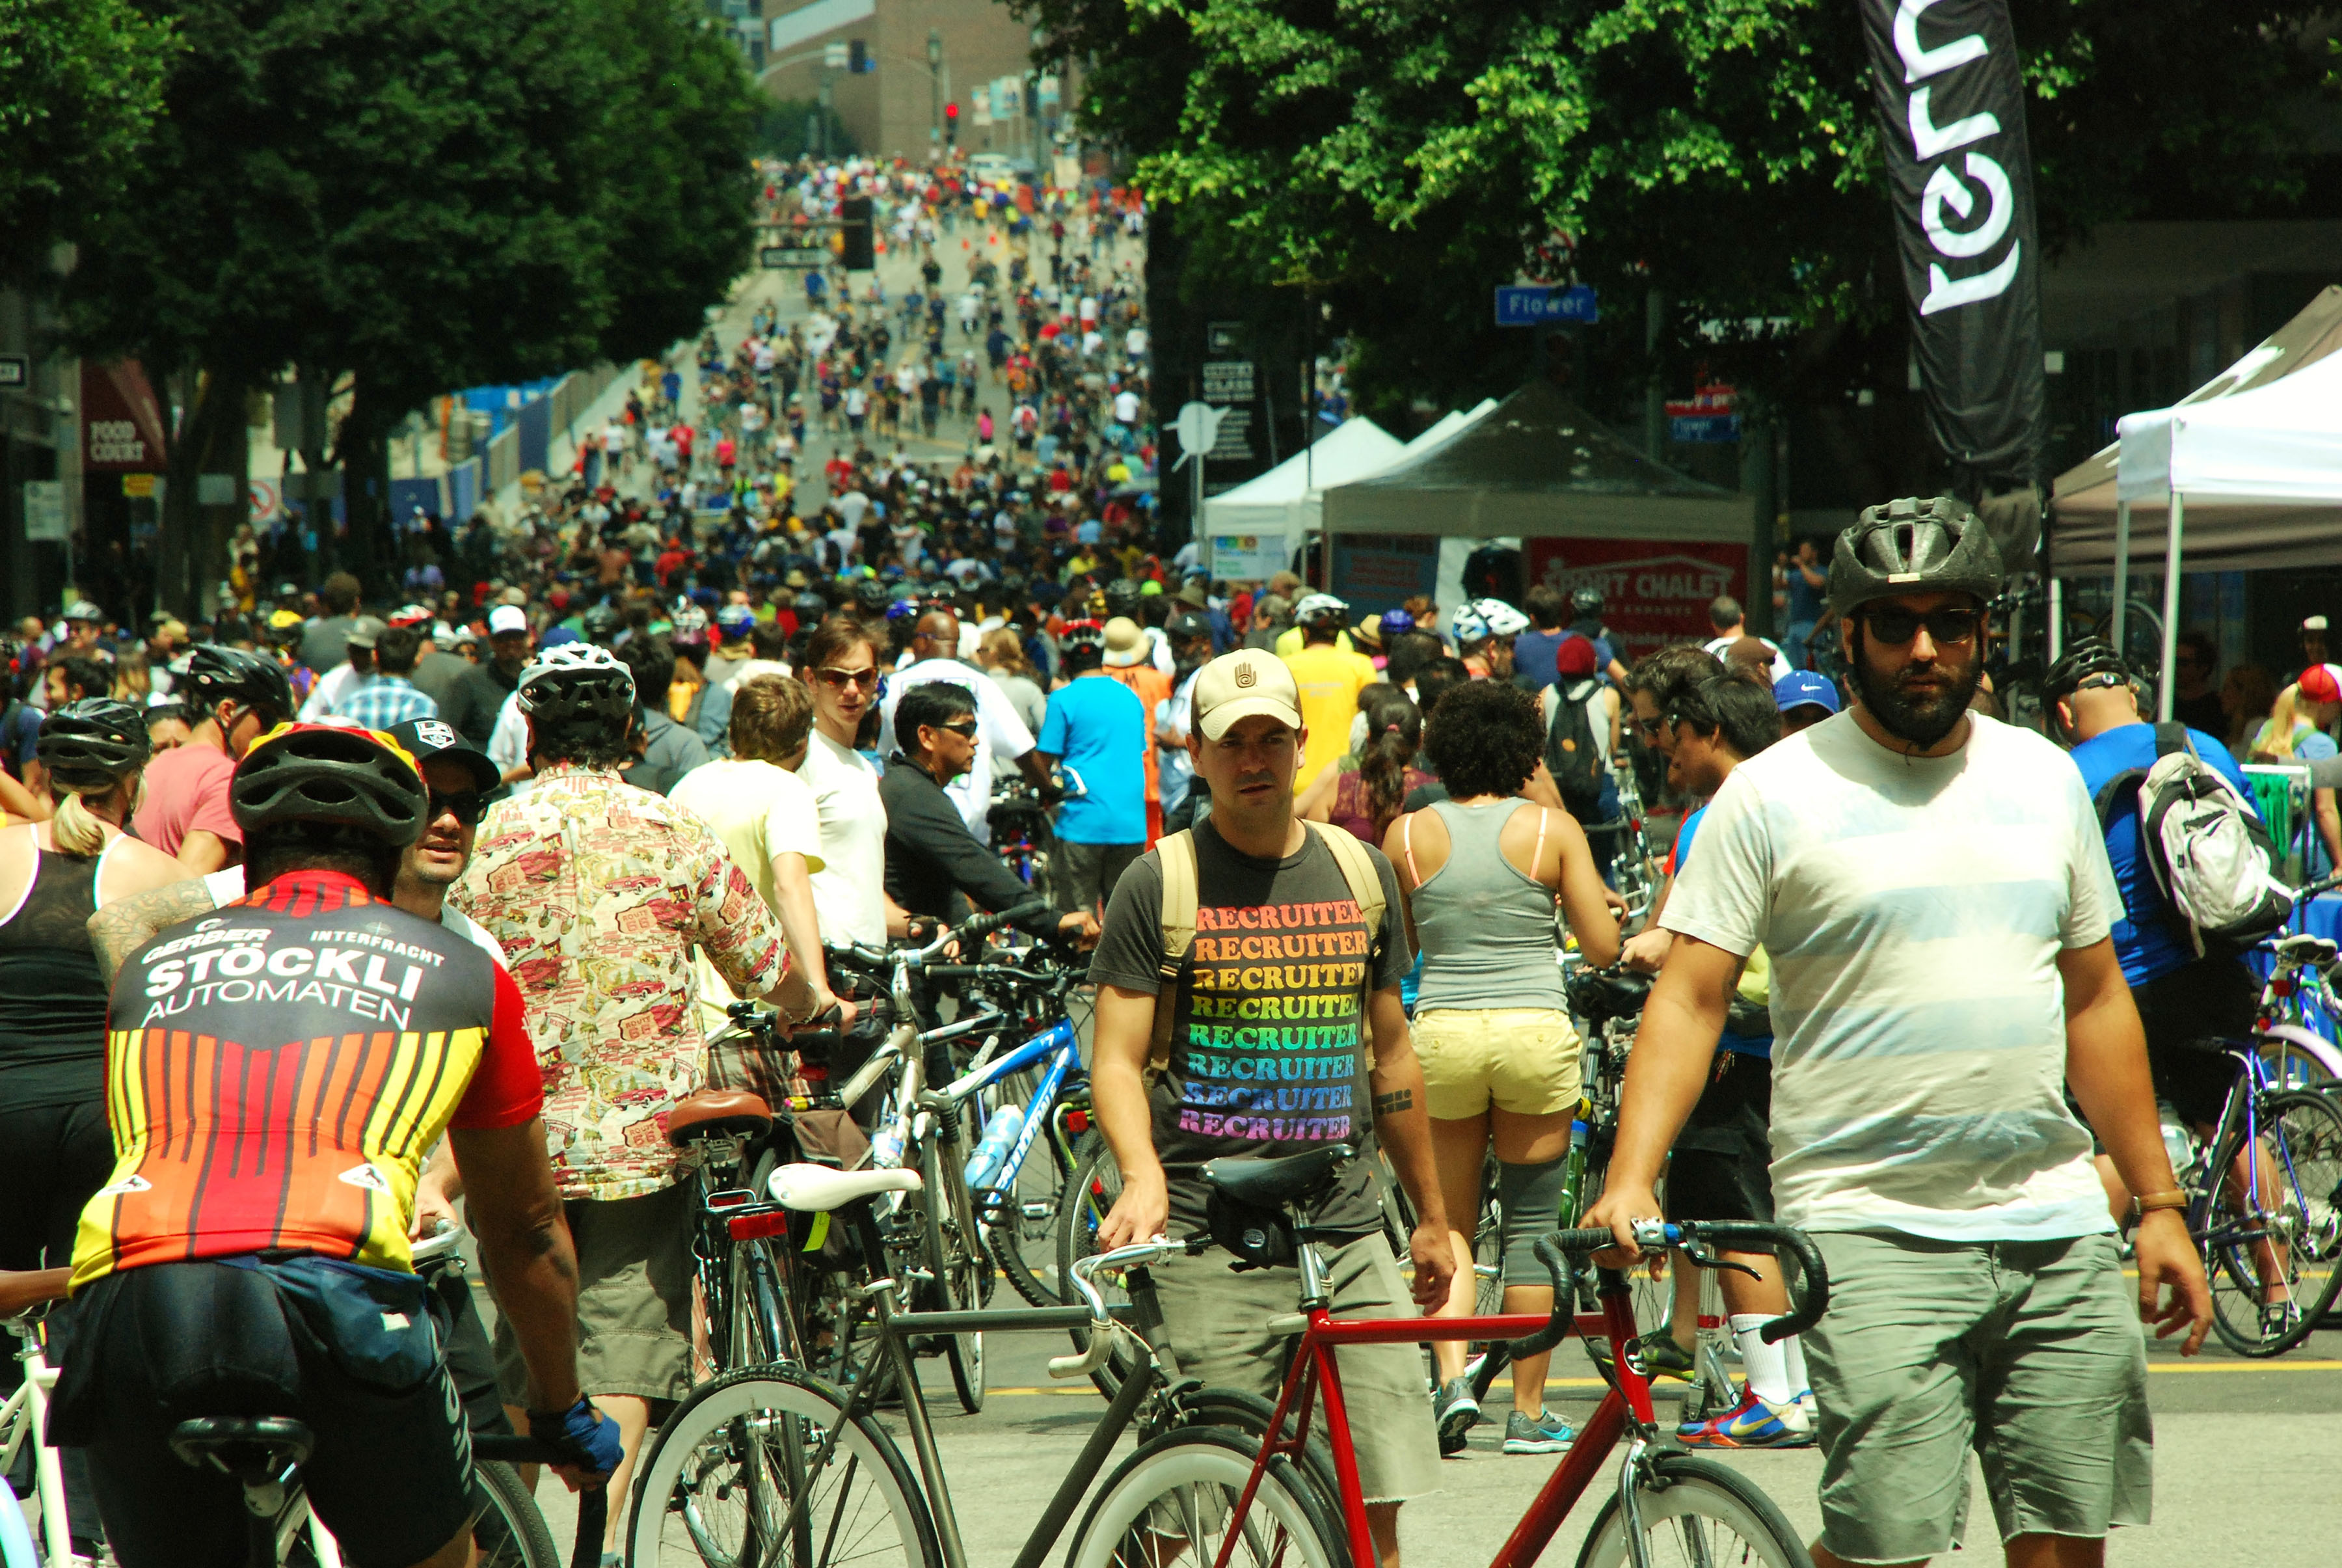 CicLAvia Associated with Increased Sales to Local Businesses